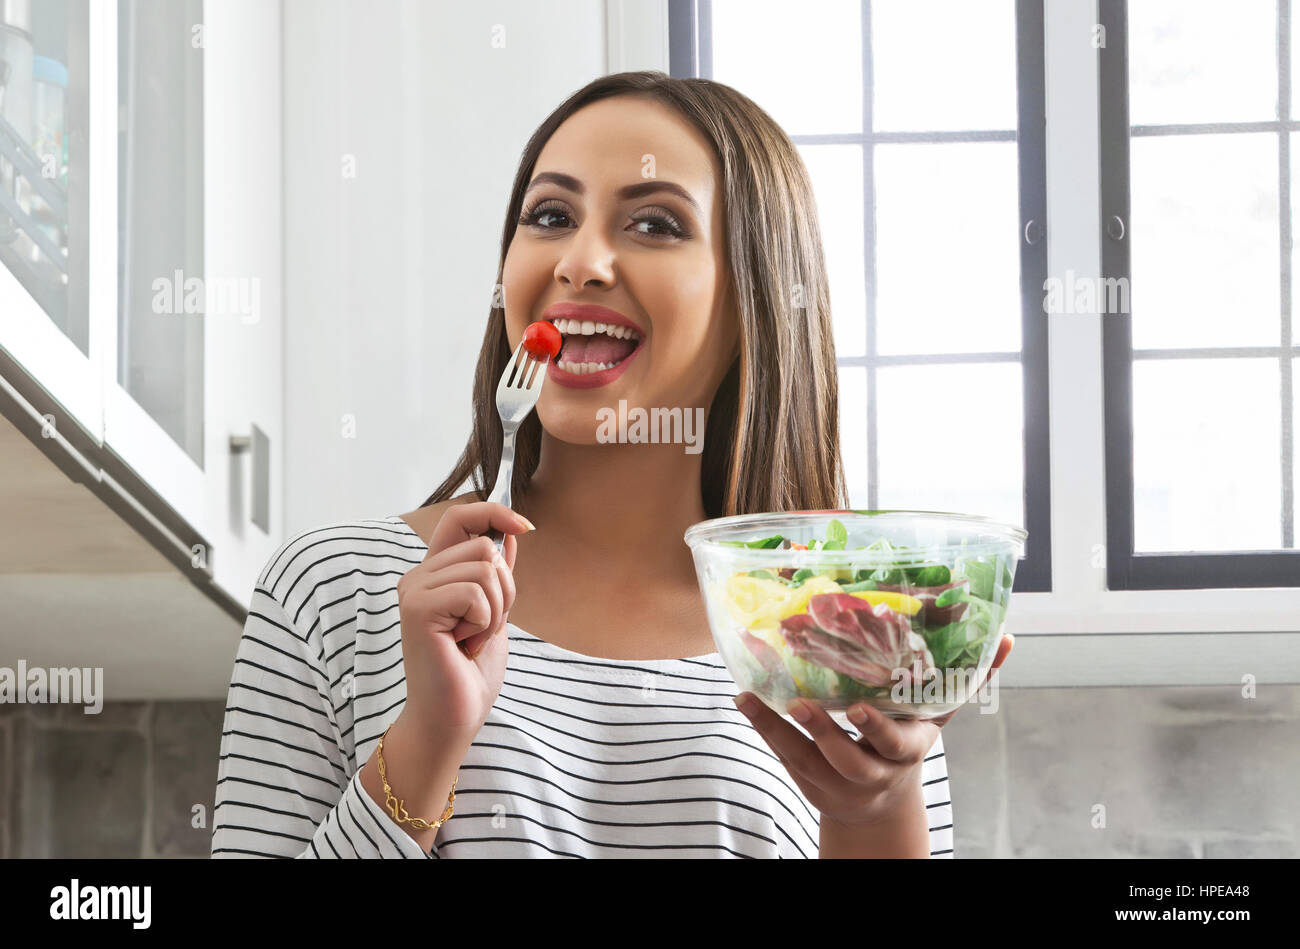 Close-up of a woman eating vegetable salad Stock Photo